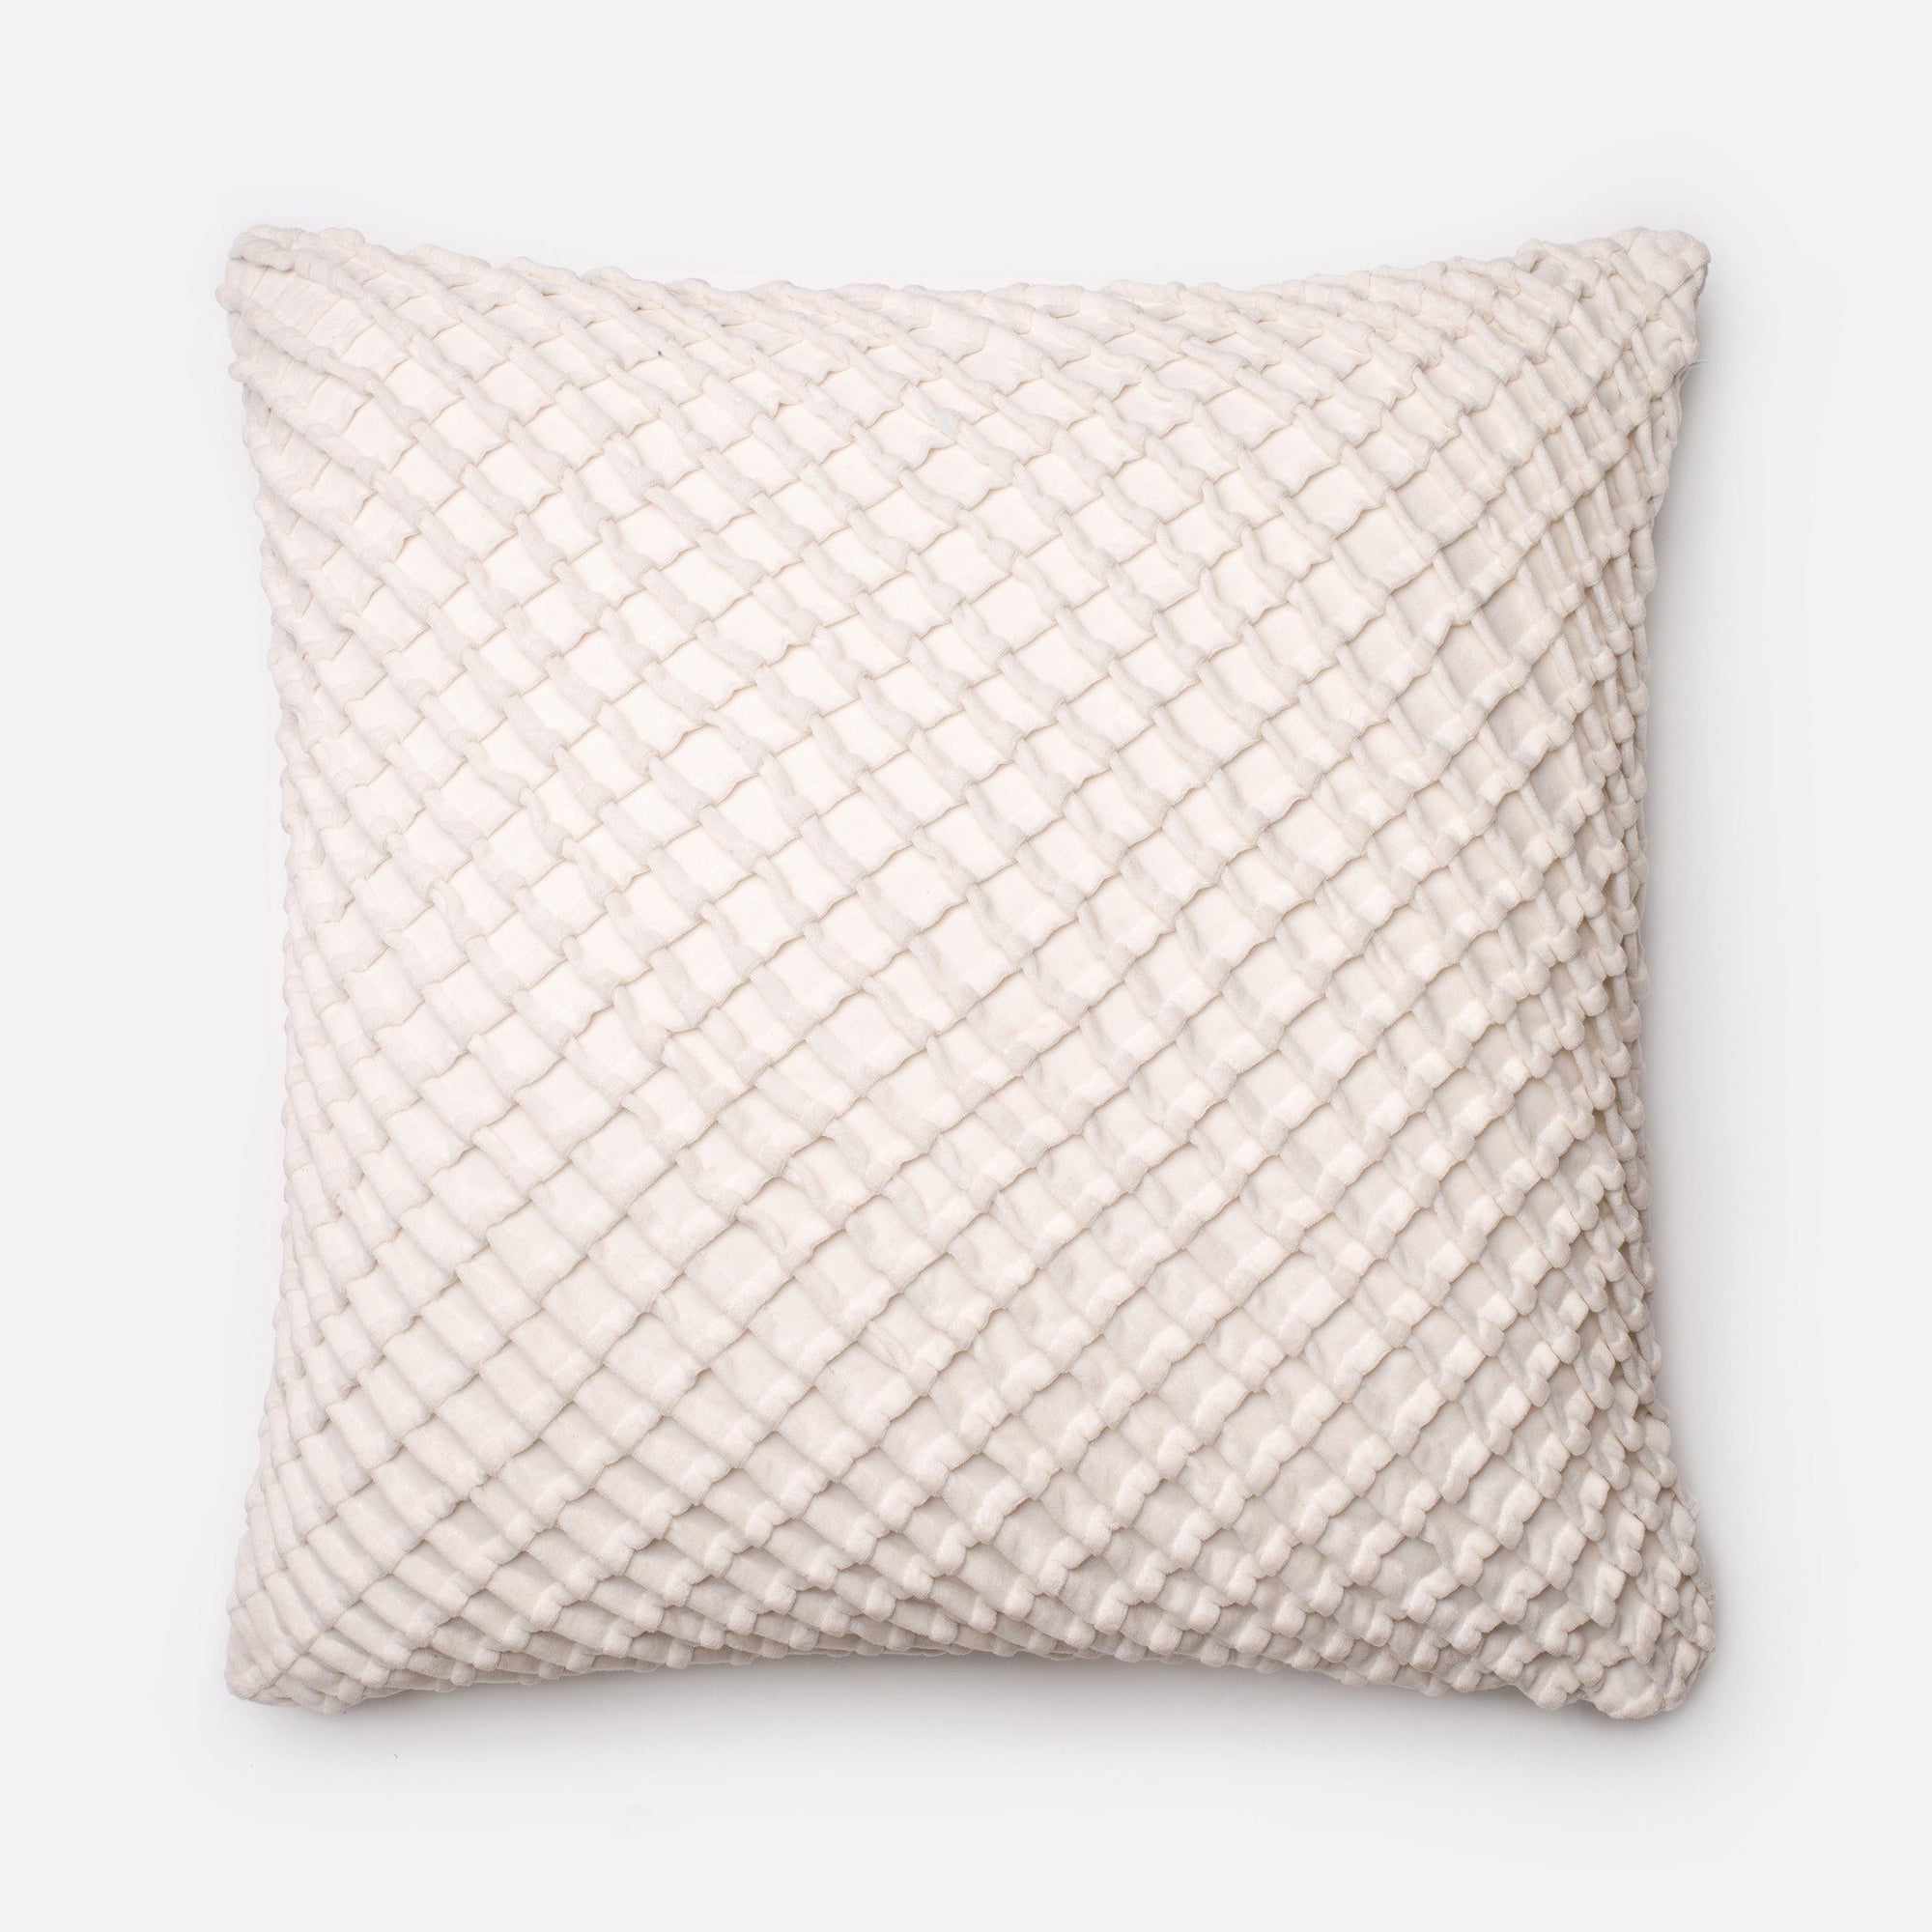 White Square P0125 Pillow - Rug & Home